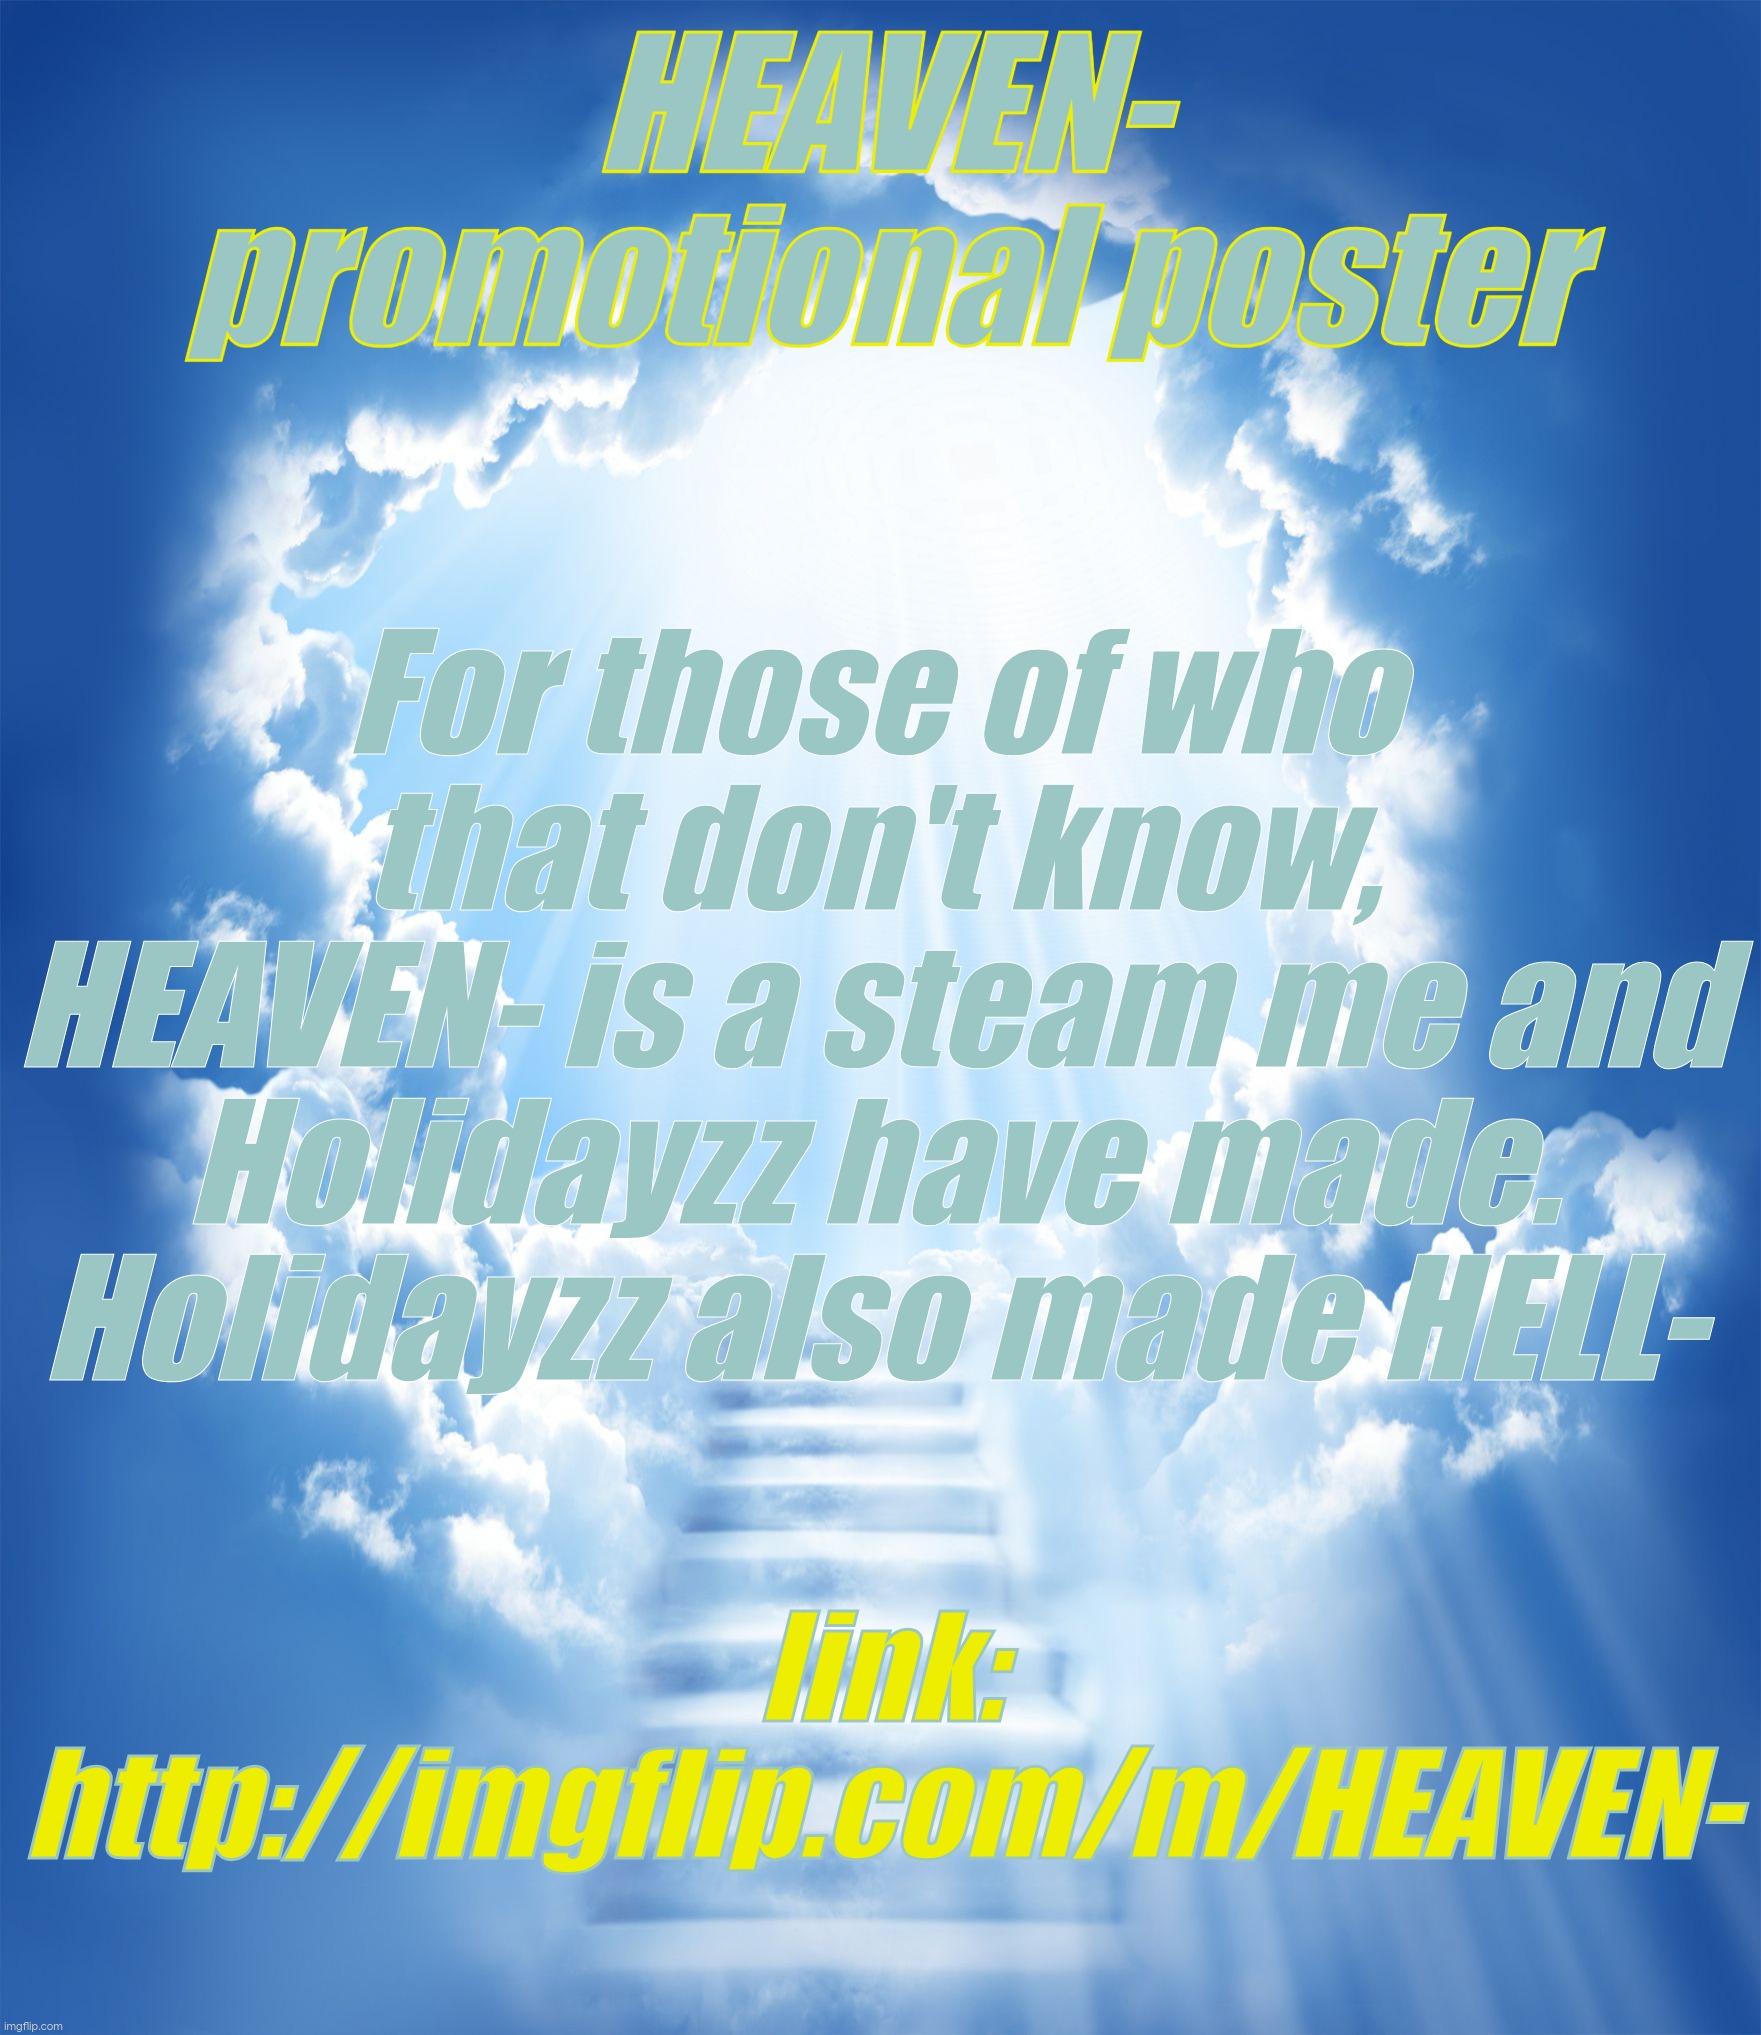 HEAVEN- promotional poster. u acan also ask for mod before the second of march | HEAVEN- promotional poster; For those of who that don't know, HEAVEN- is a steam me and Holidayzz have made. Holidayzz also made HELL-; link: http://imgflip.com/m/HEAVEN- | image tagged in heaven,you have been eternally blessed for reading the tags | made w/ Imgflip meme maker